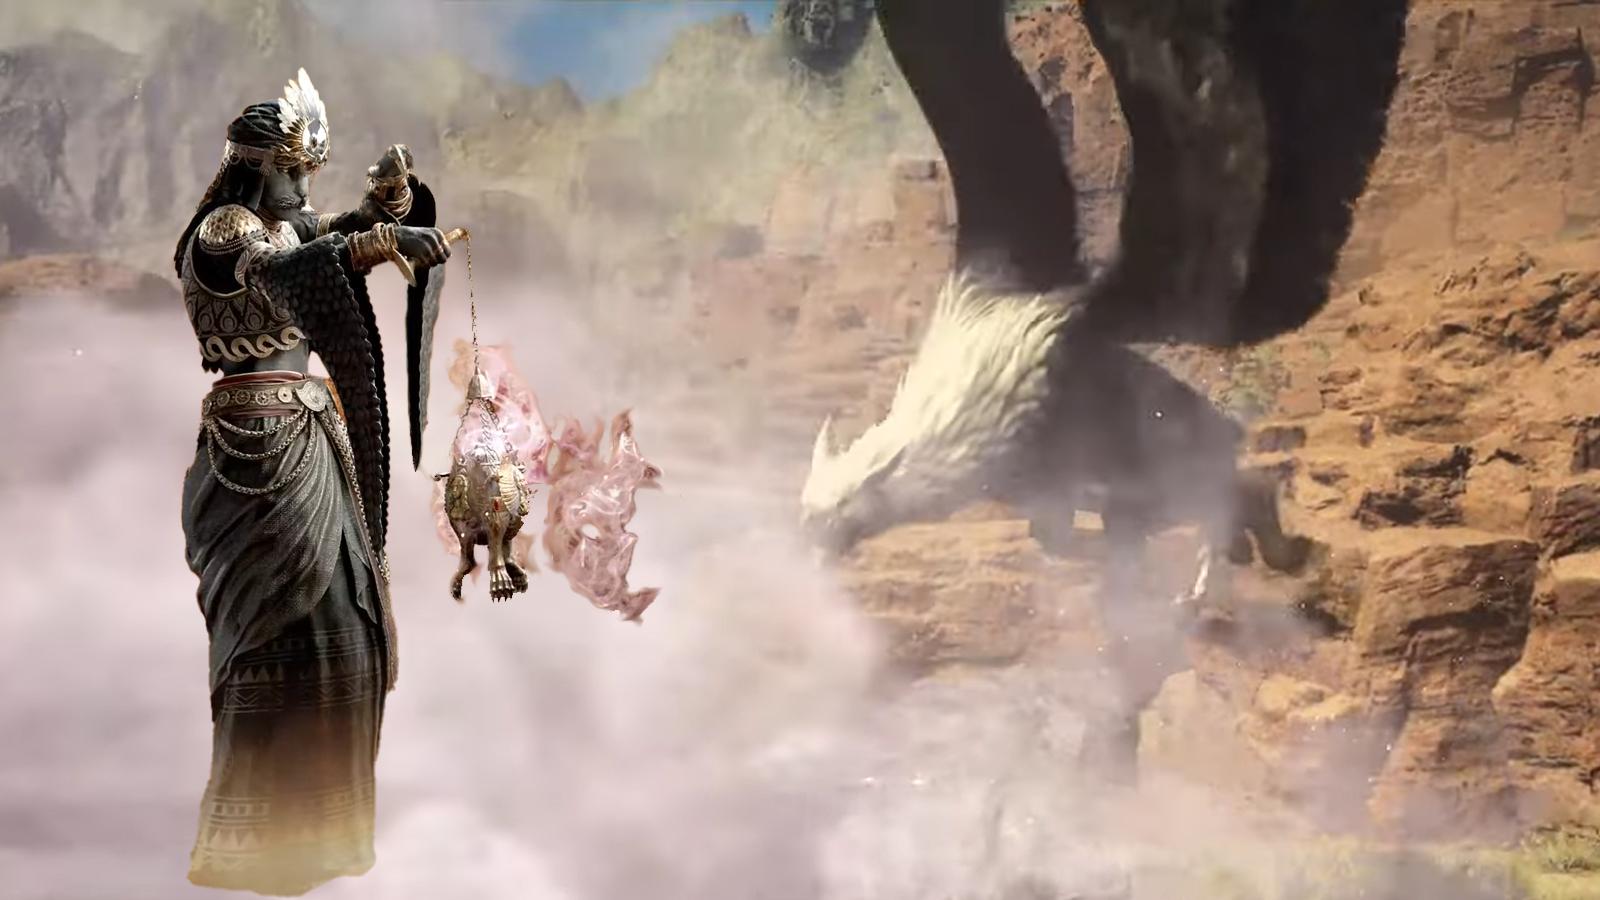 Promotional art of the Trickster Vocation from Dragon's Dogma 2 superimposed over a clip from the game's trailer.